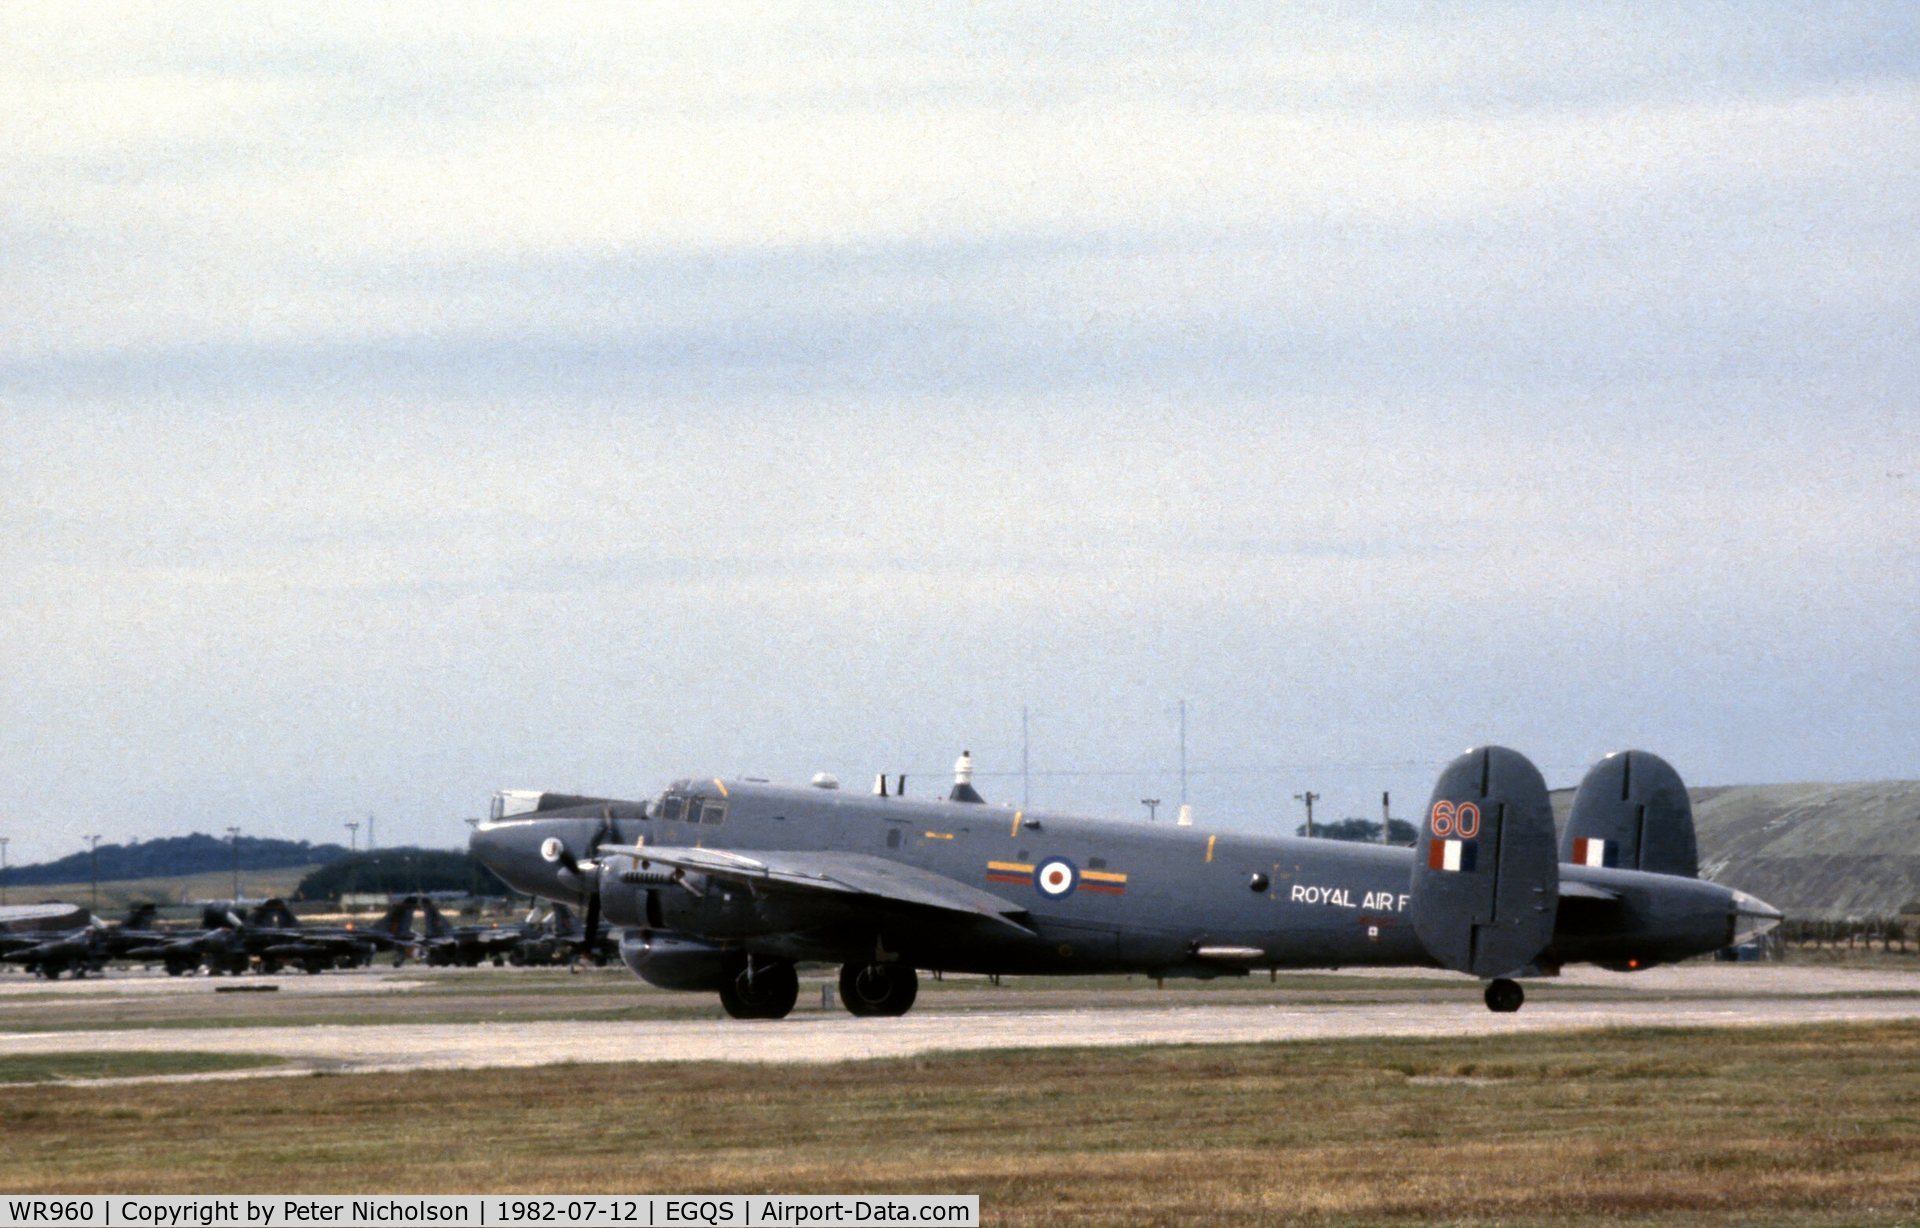 WR960, 1954 Avro 716 Shackleton AEW.2 C/N Not found WR960, Shackleton AEW.2 of 8 Squadron preparing for take-off at RAF Lossiemouth in the Summer of 1982.